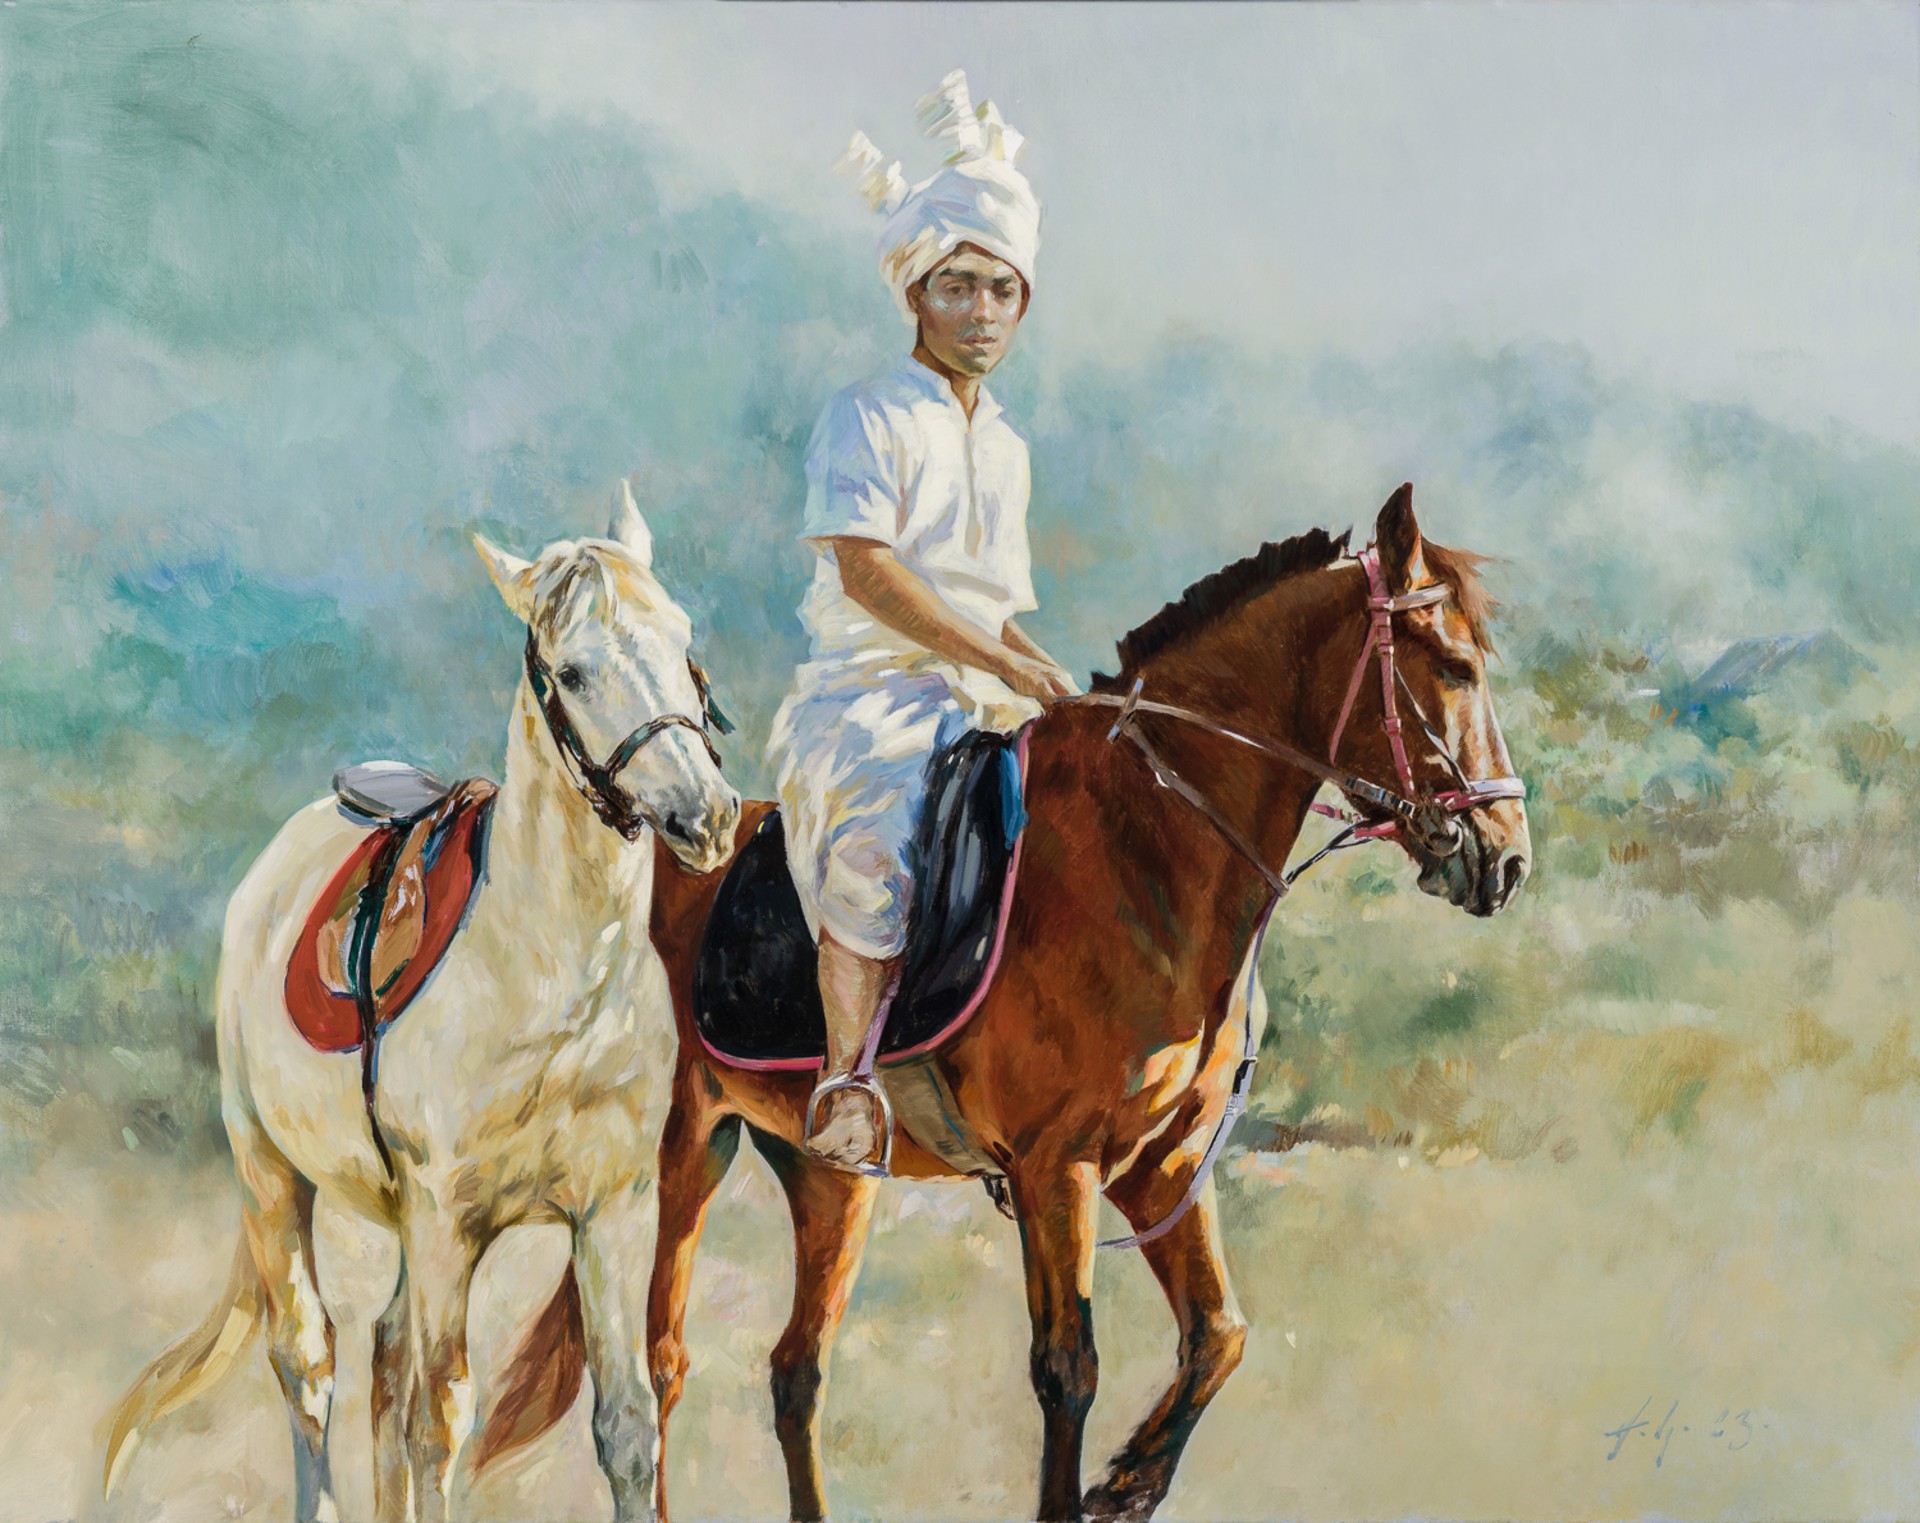 POLO AT MANIPUR by Marcus Hodge